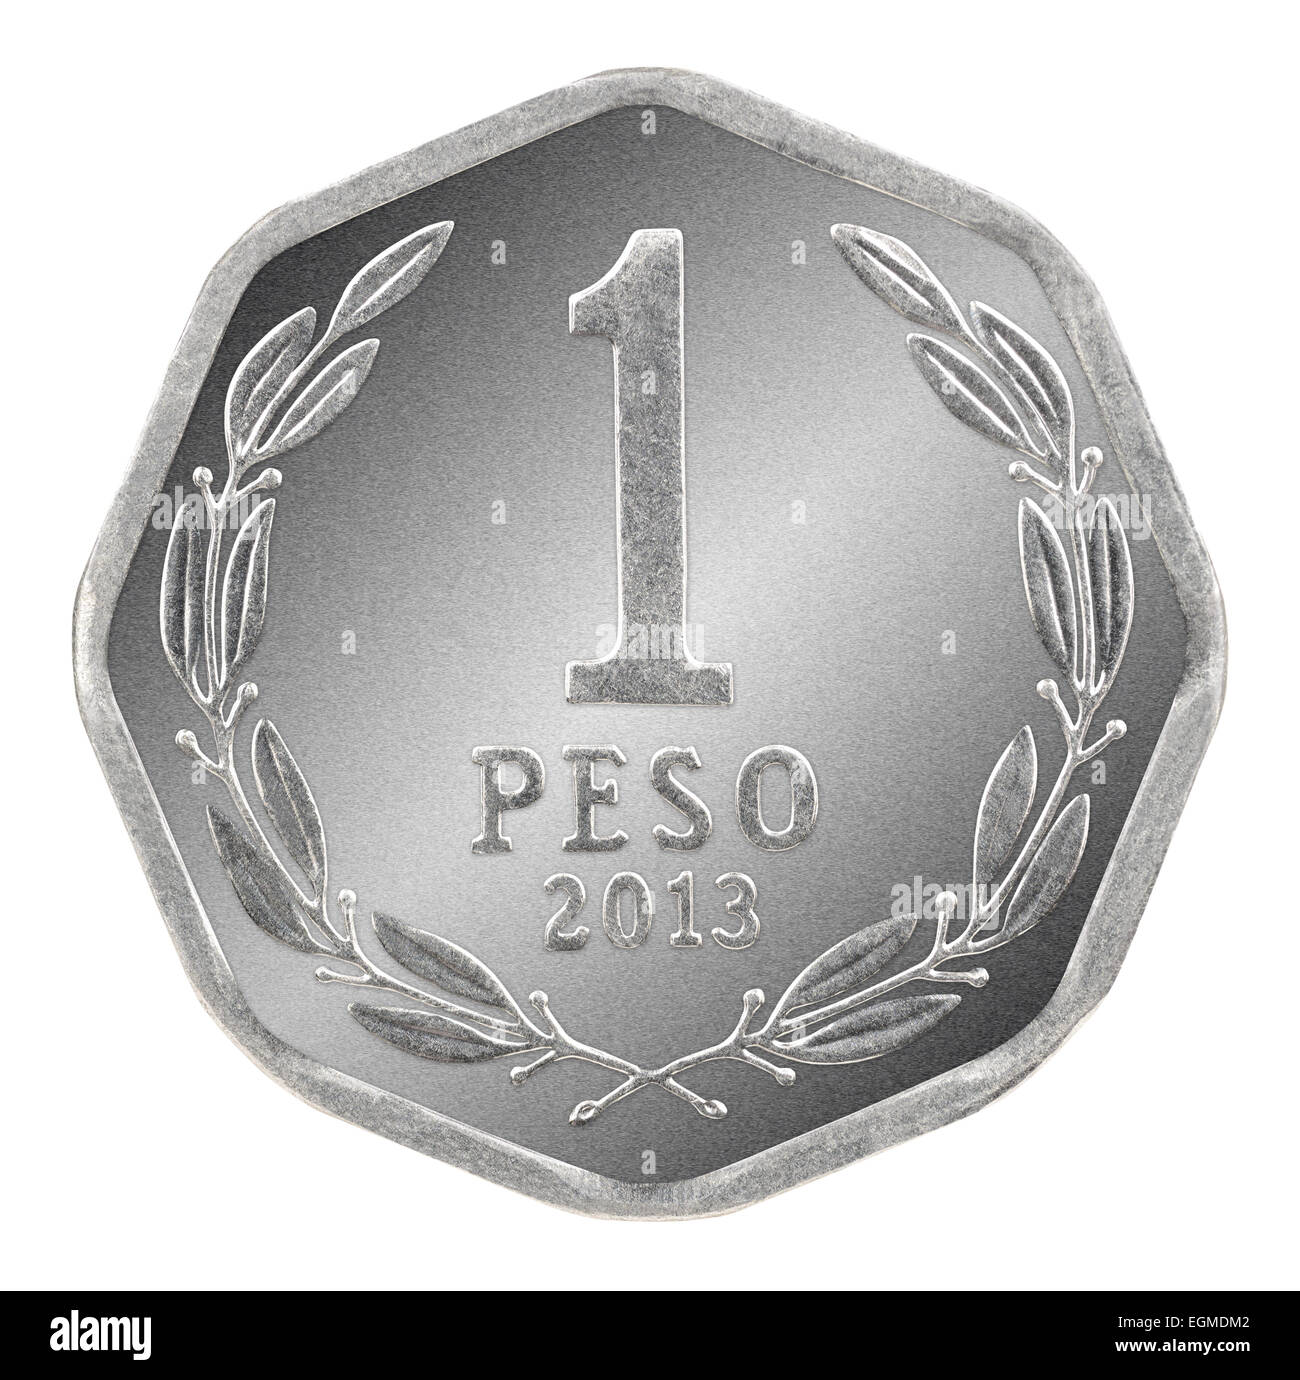 One chilean peso coin chile currency Stock Photo